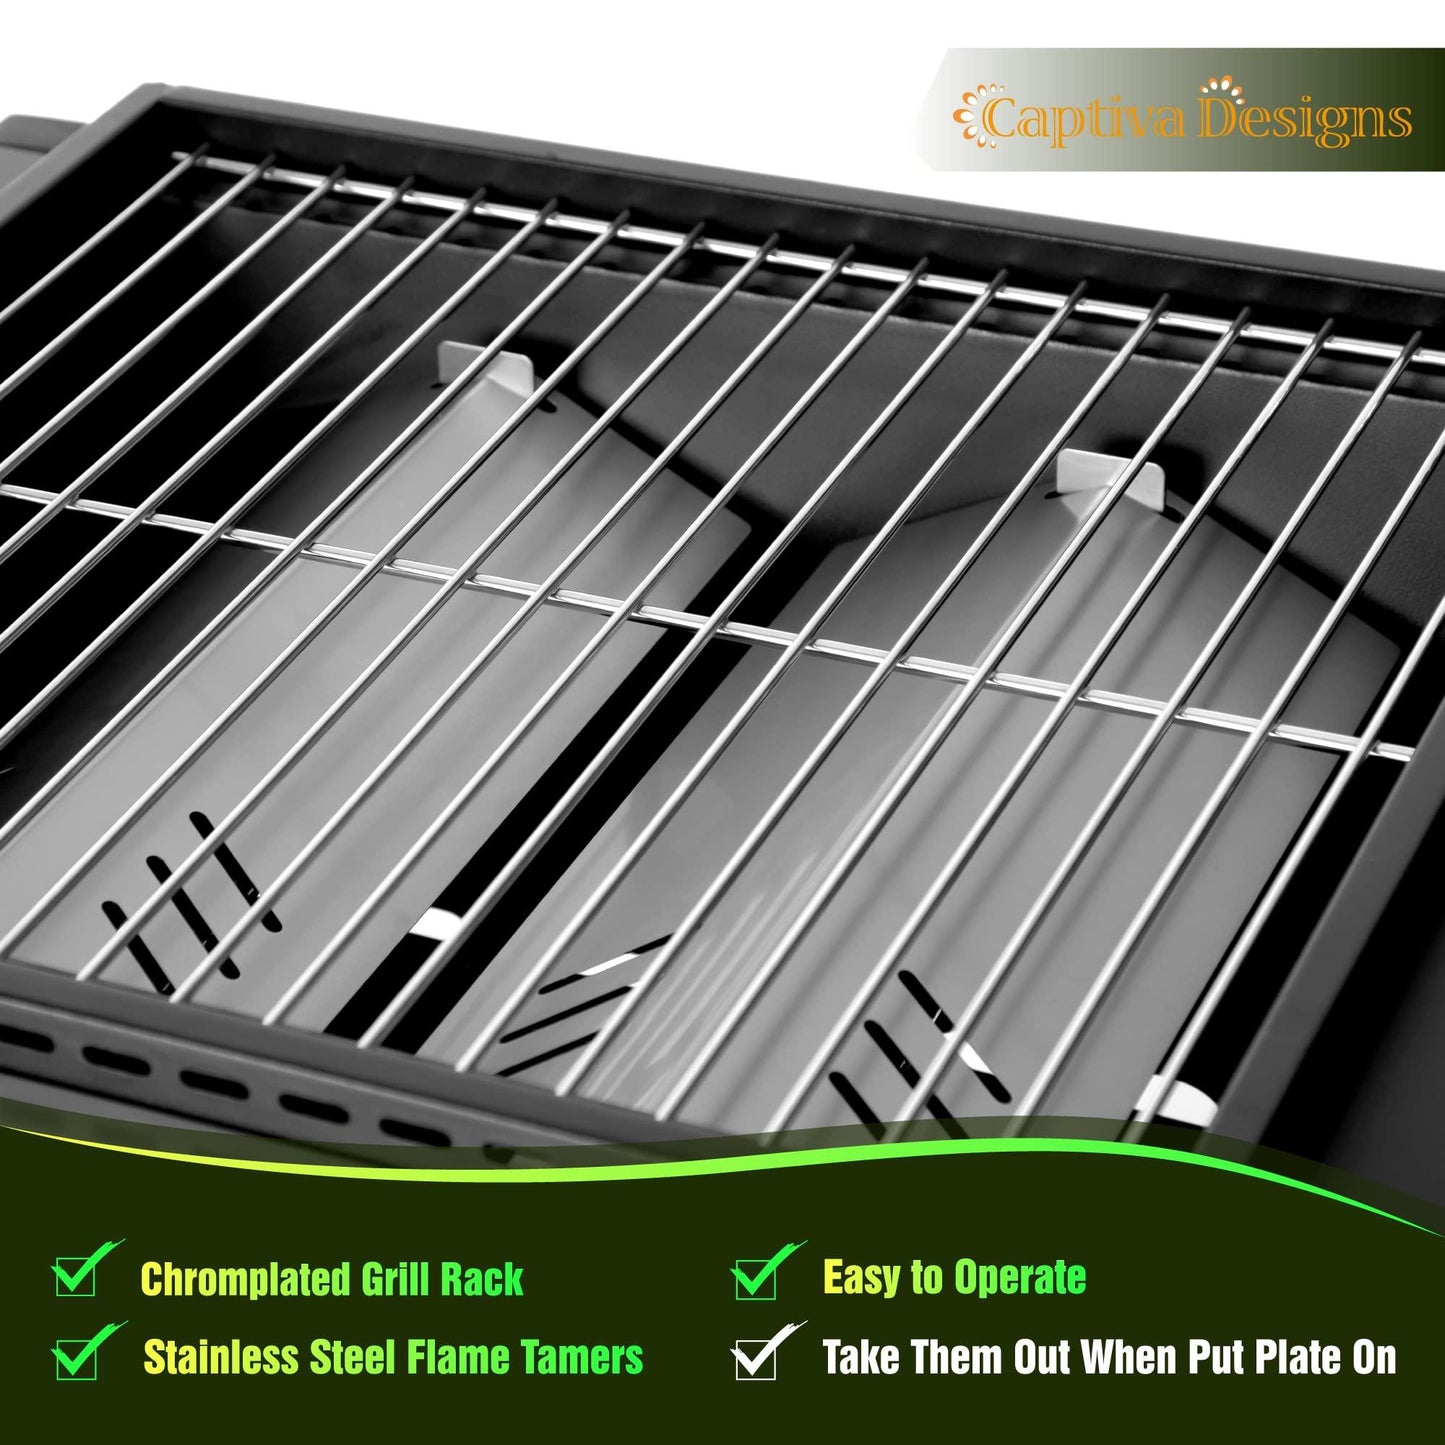 Captiva Designs 2-Burner Propane Gas Flat Top Griddle Grill, 171 sq.in Cooking Area Outdoor BBQ Grill for a Small Family, 20,000 BTU Output - CookCave